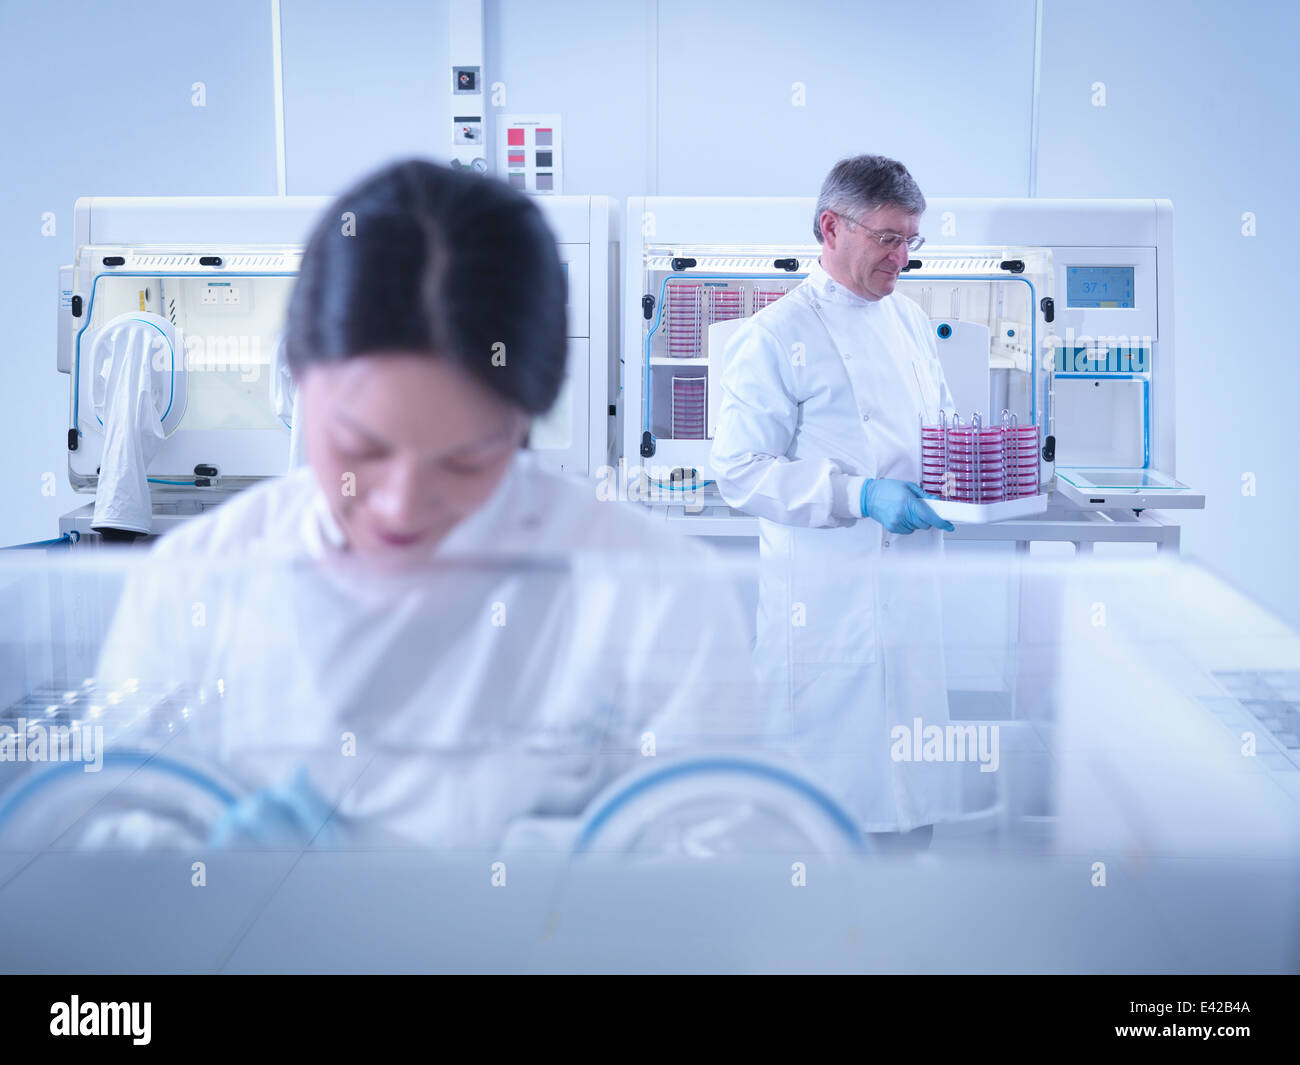 Scientists working in laboratory at workstation Stock Photo